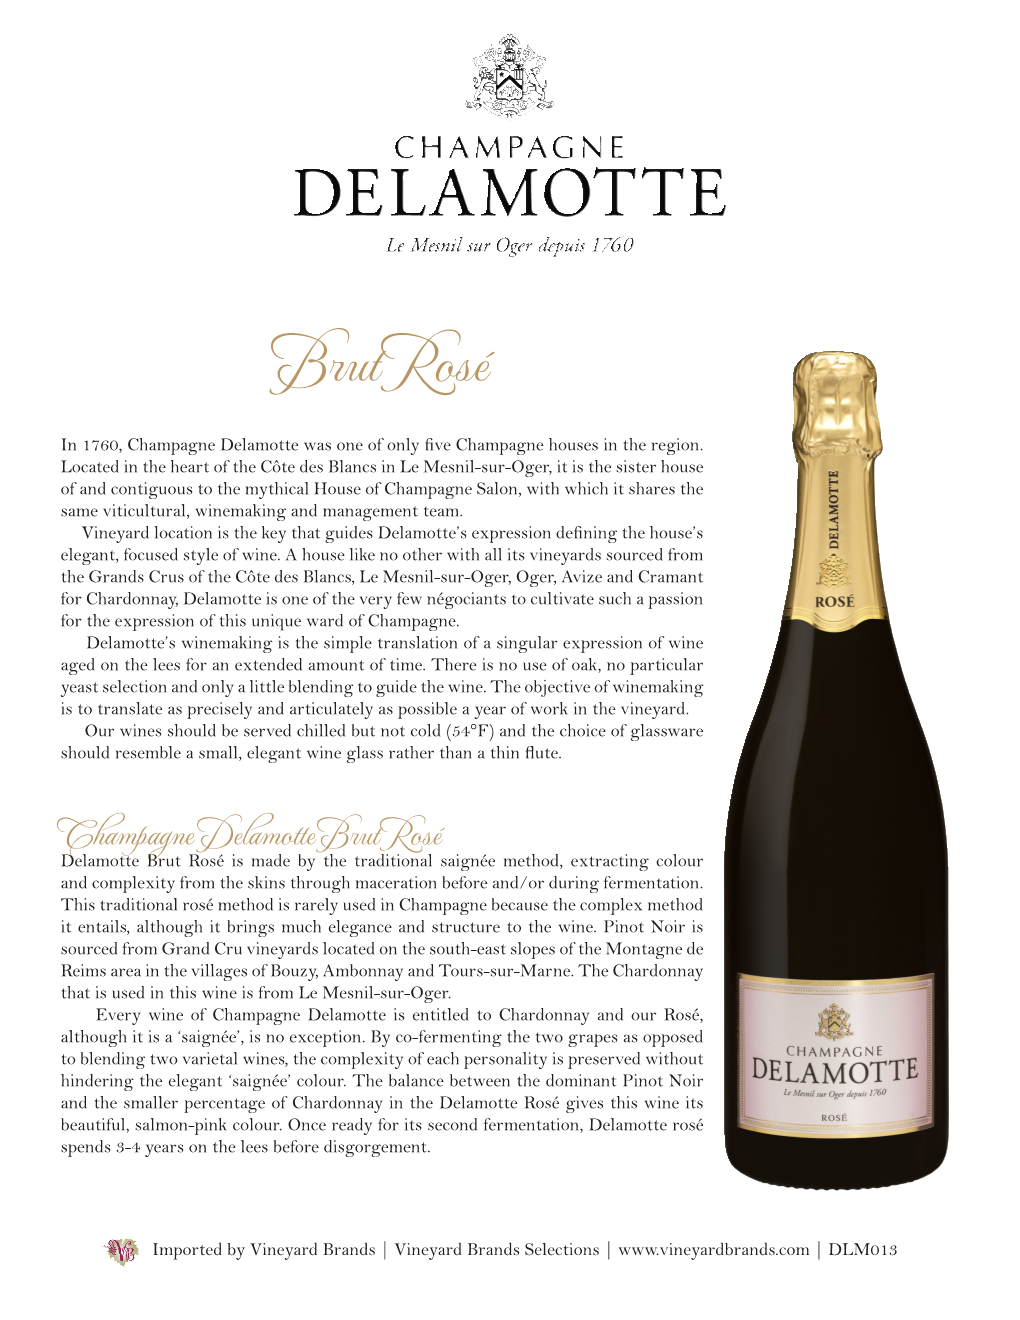 Brut Rosé in 1760, Champagne Delamotte Was One of Only Five Champagne Houses in the Region